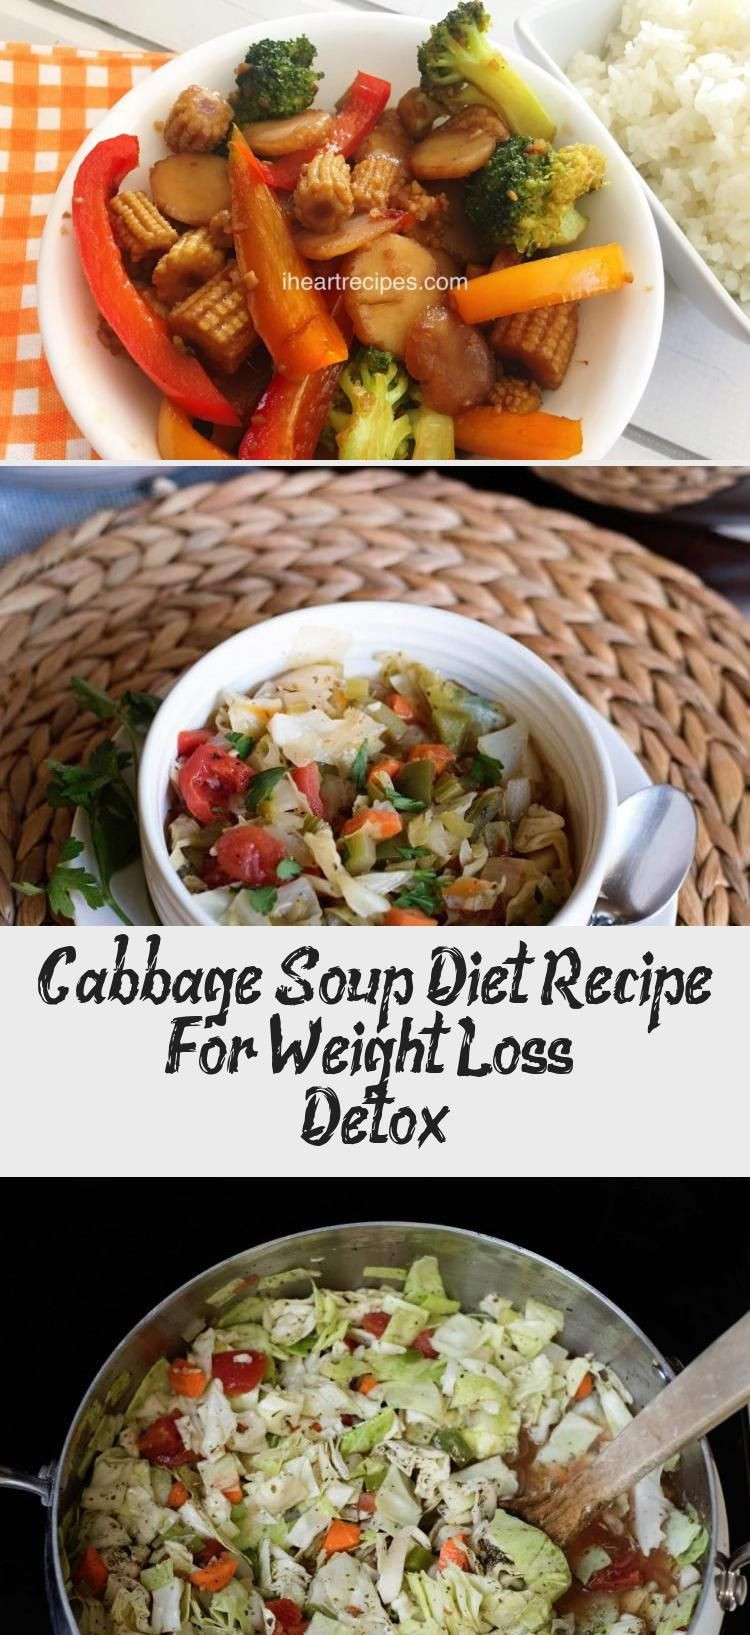 Original Cabbage Soup Diet Recipe
 Original cabbage soup t recipe for weight loss Does